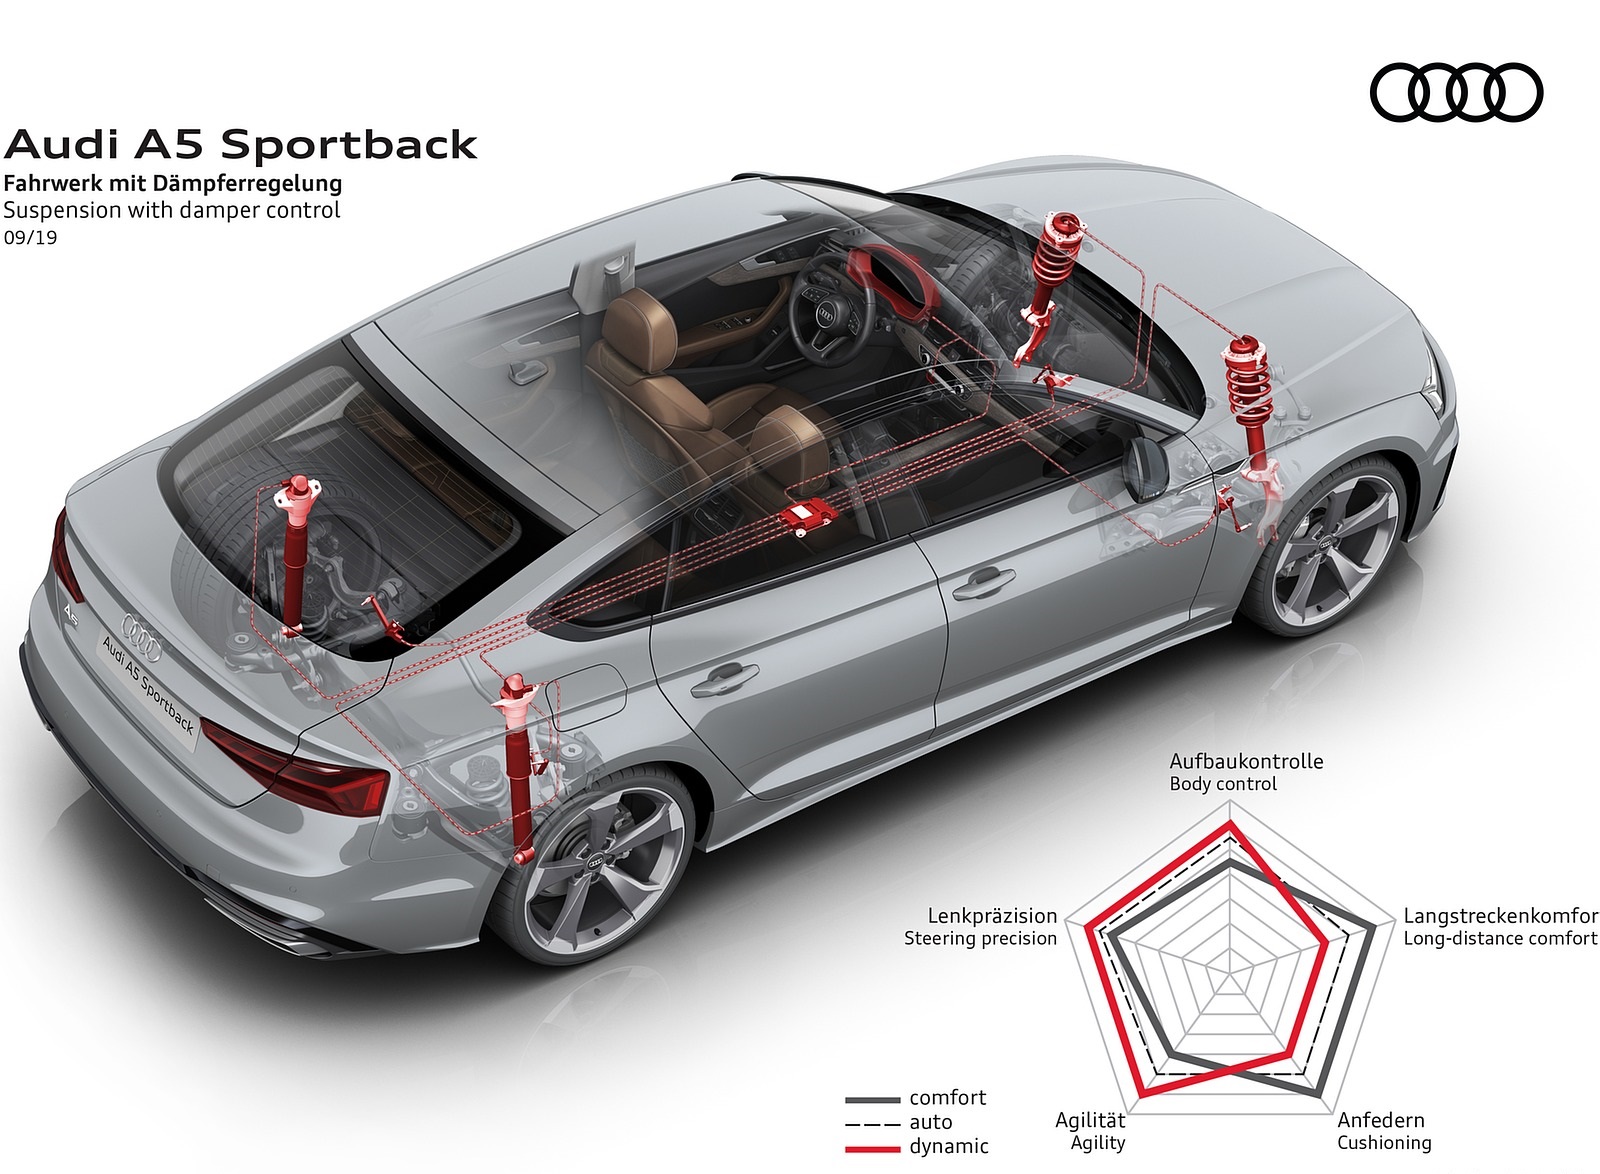 2020 Audi A5 Sportback Suspension with damper control Wallpapers #18 of 31